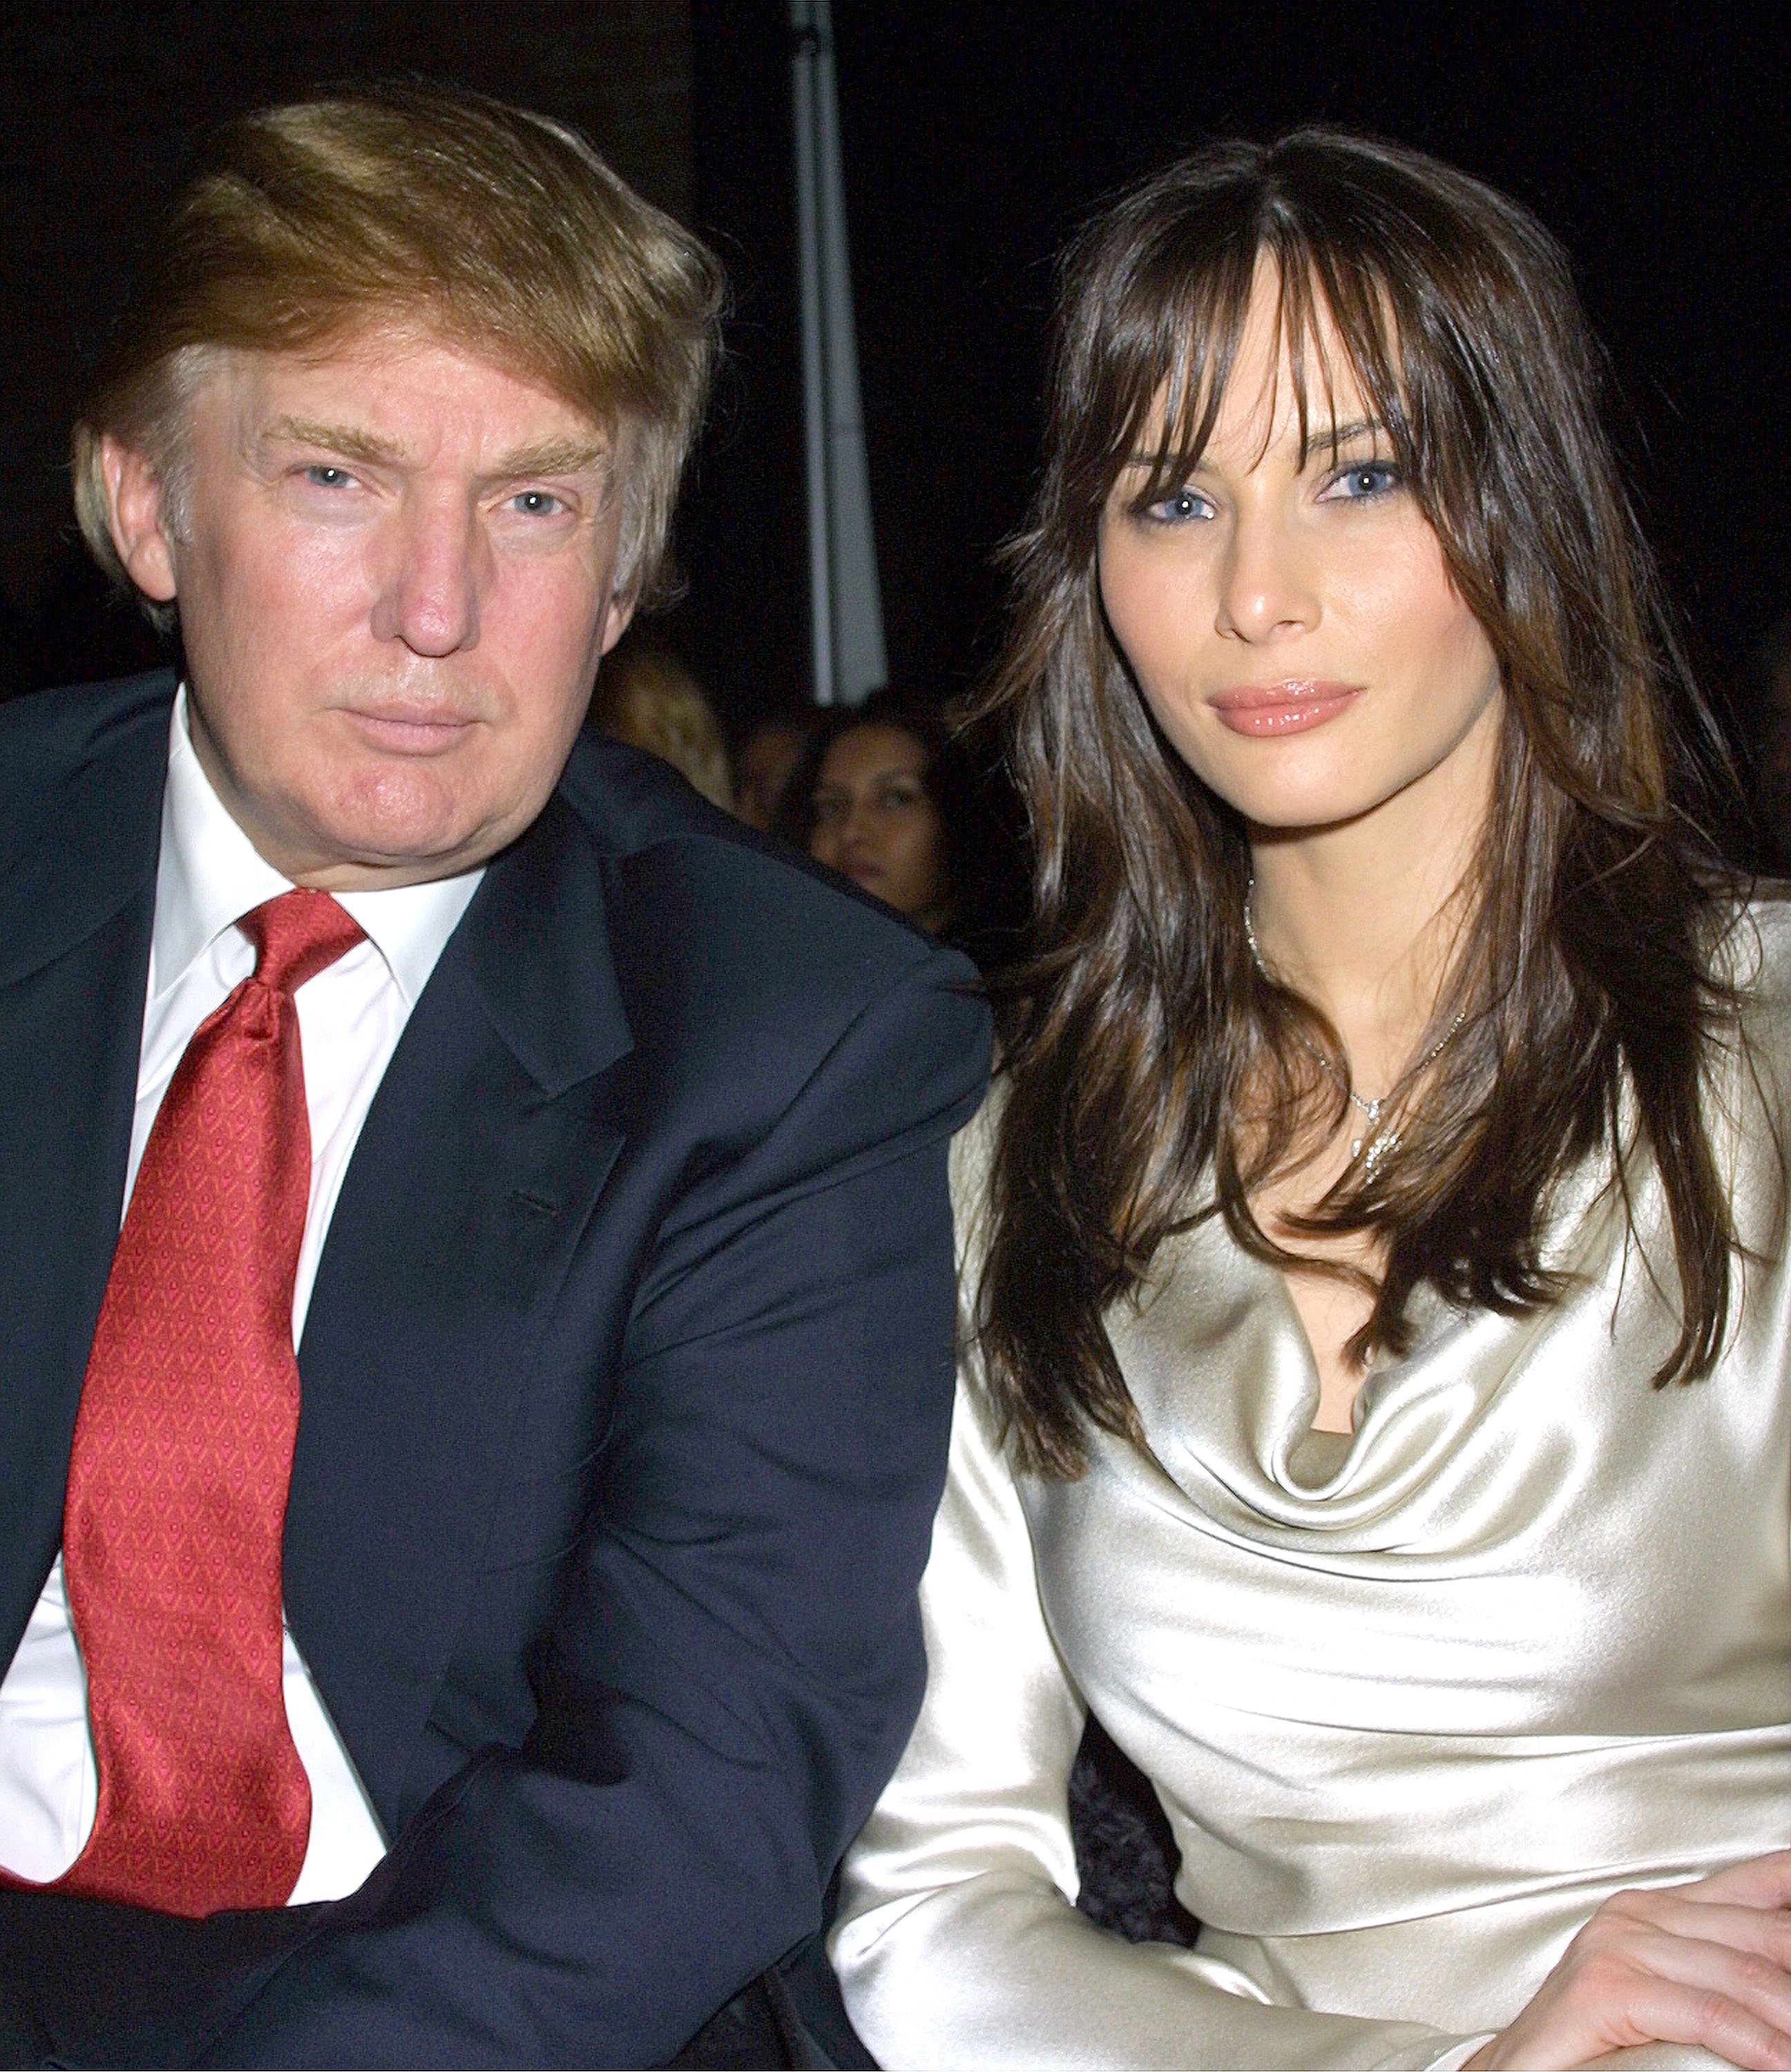  Donald Trump and Melania Knauss attend the Marc Bouwer/Peta Fall/Winter 2002 Collection show February 14, 2002 | Photo: GettyImages